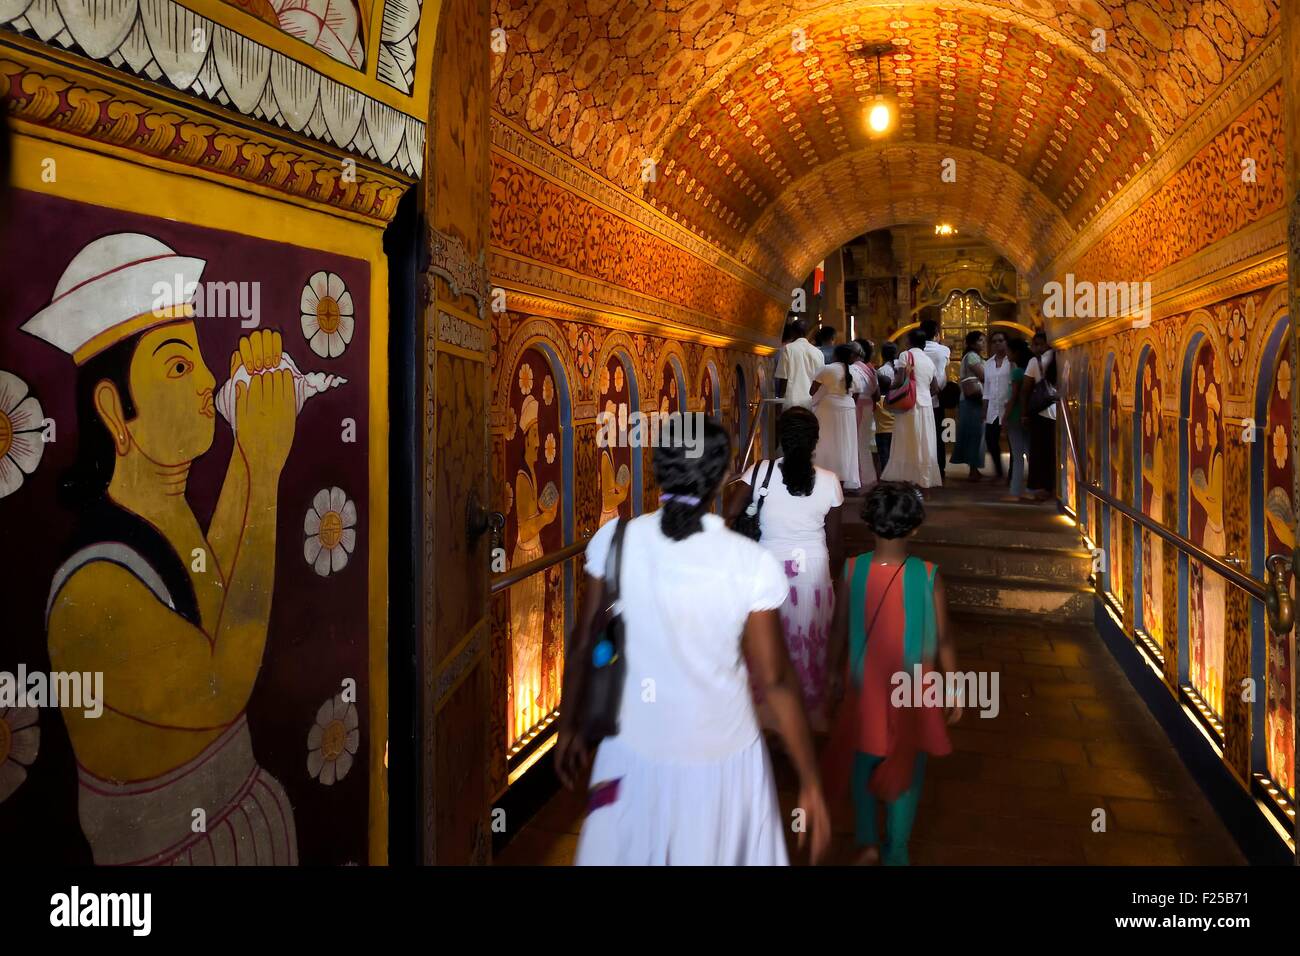 Sri Lanka, center province, Kandy, Temple of the Buddha Tooth (Sri Dalada Maligawa), entry hall decorated with floral motifs and people bringing offerings Stock Photo